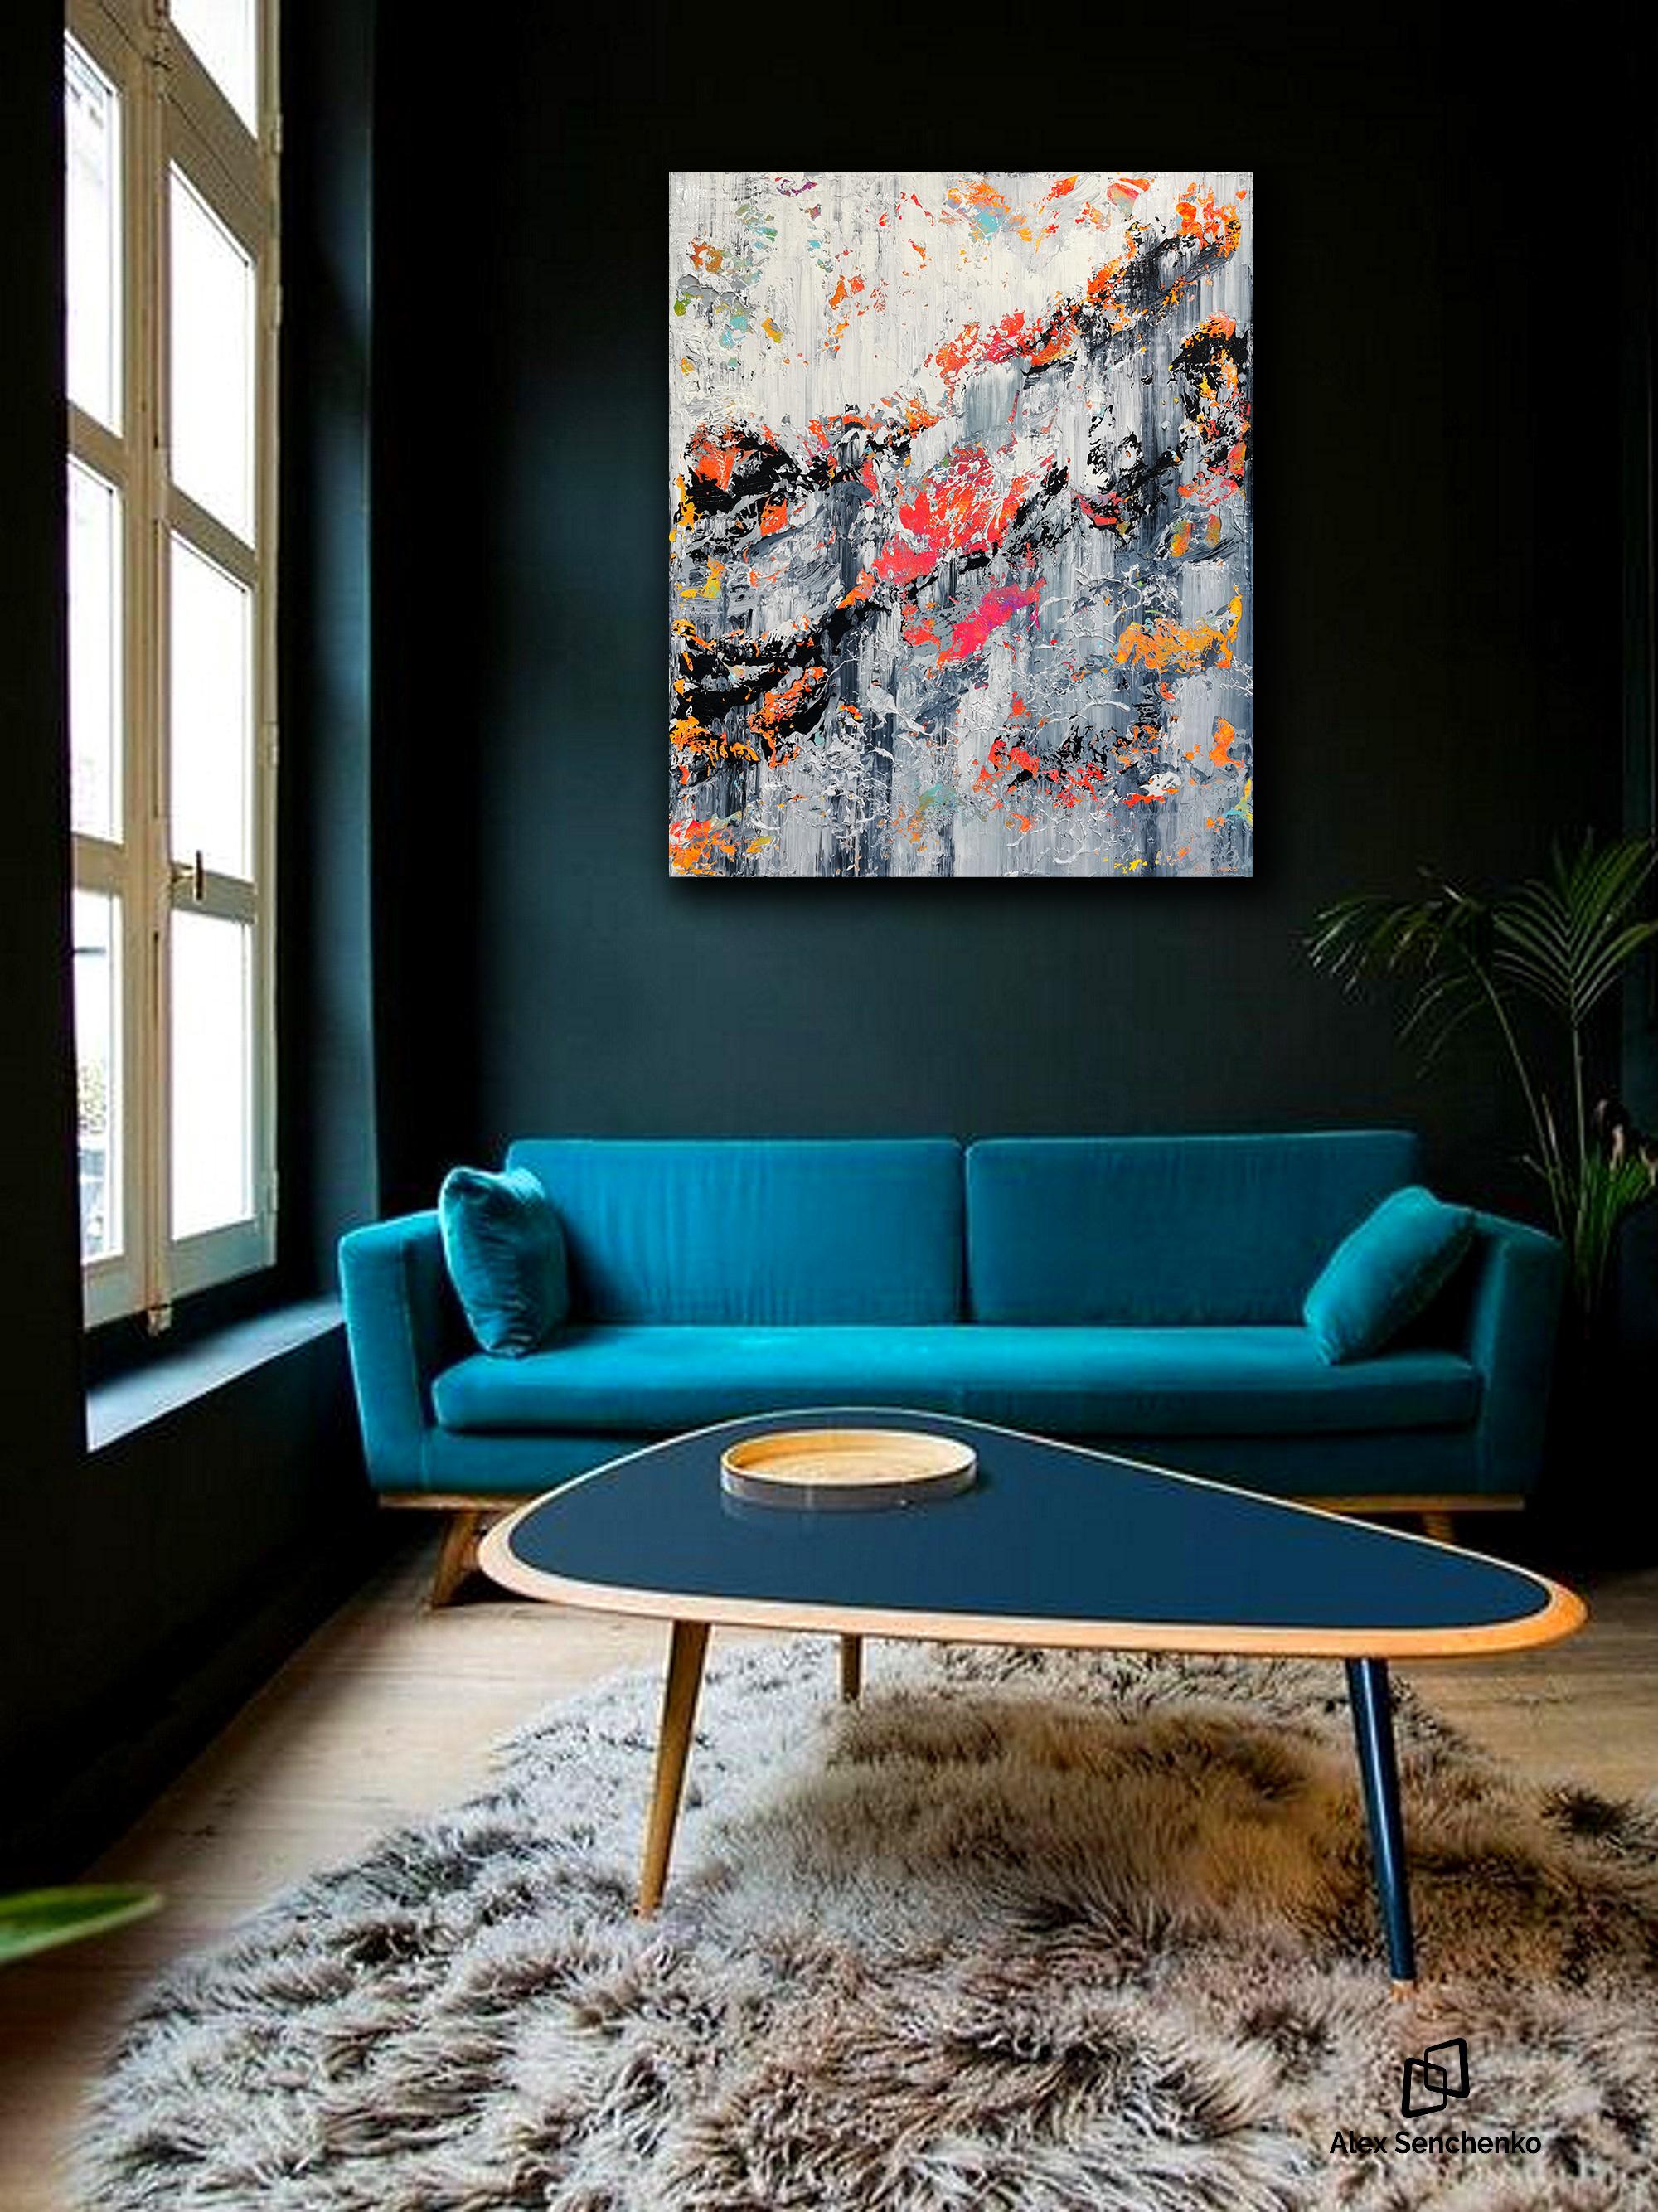 There’s something different about the homes of creative people. They like to surround themselves with inspiring things, from unique tablecloths to the incredible paintings on the walls. Alex Senchenko’s - Abstract 2221 - can give your home that